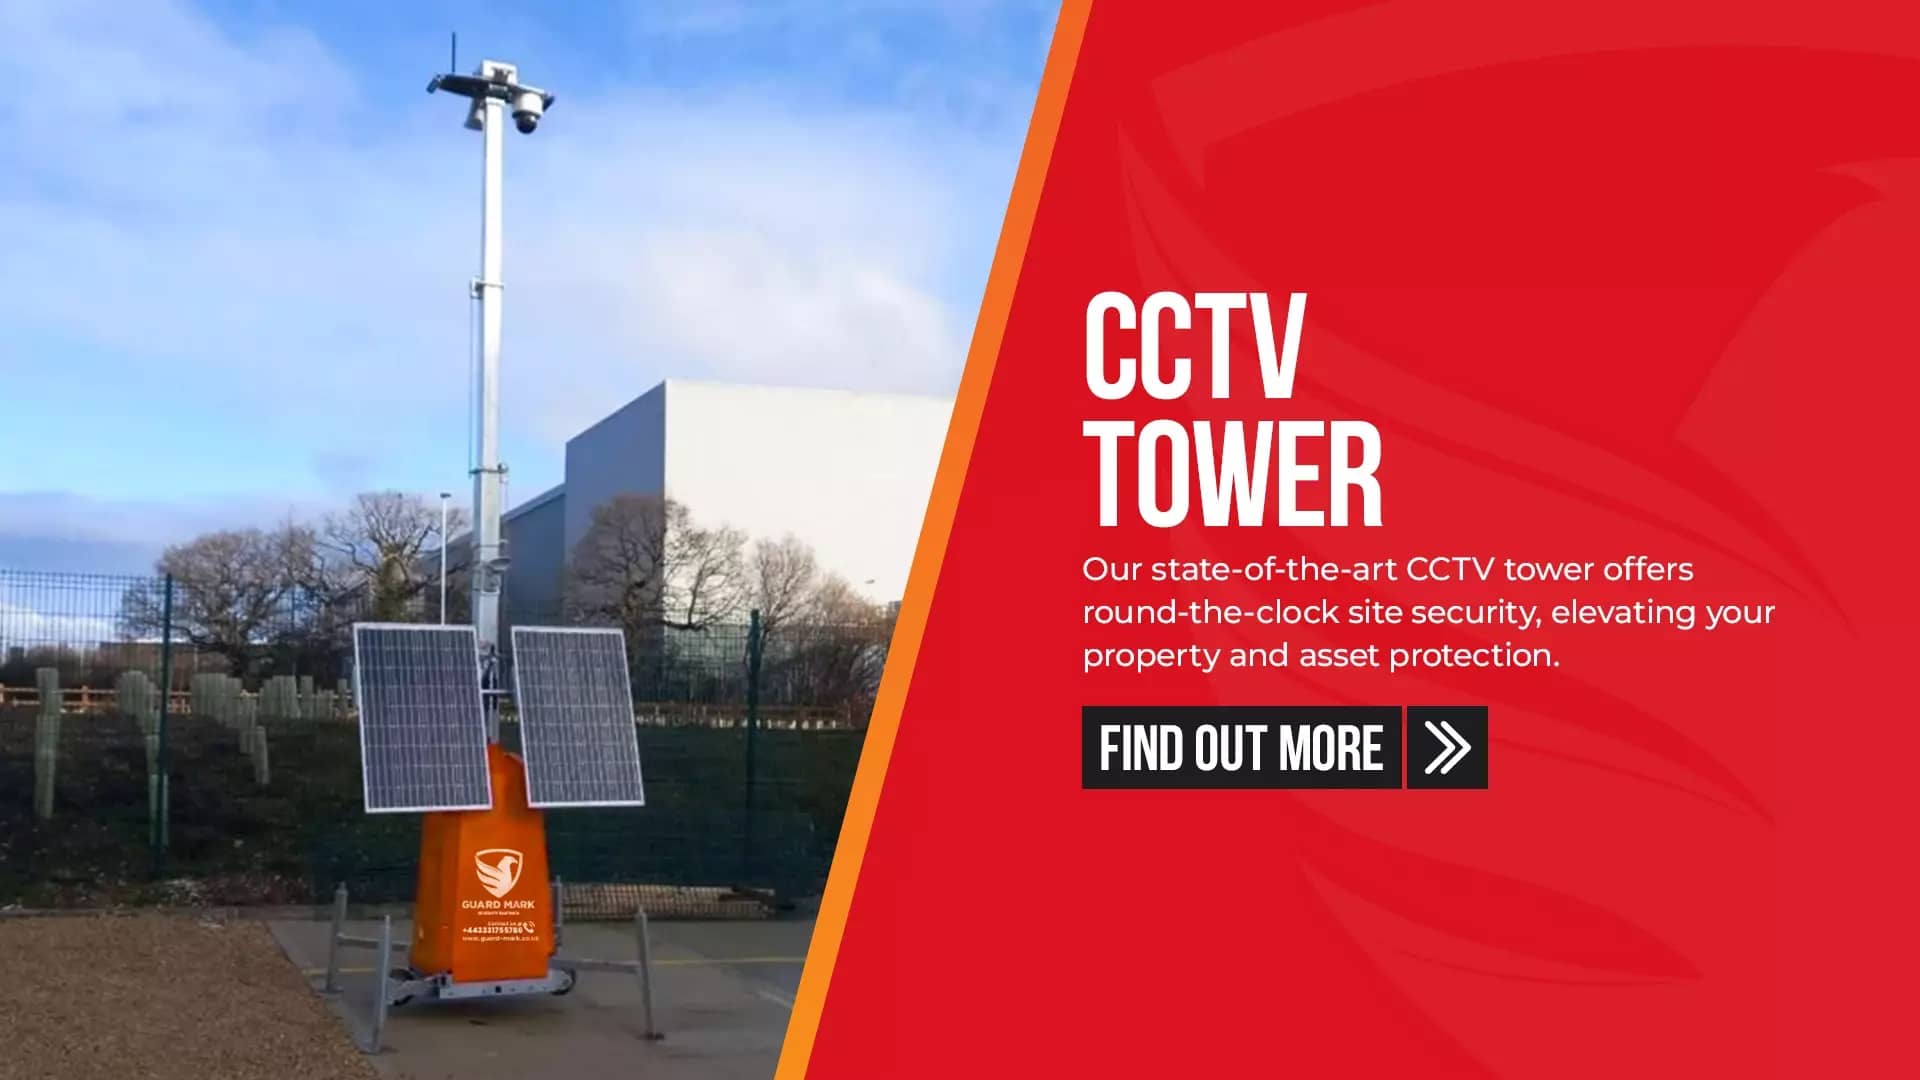 CCTV Tower services by guard mark